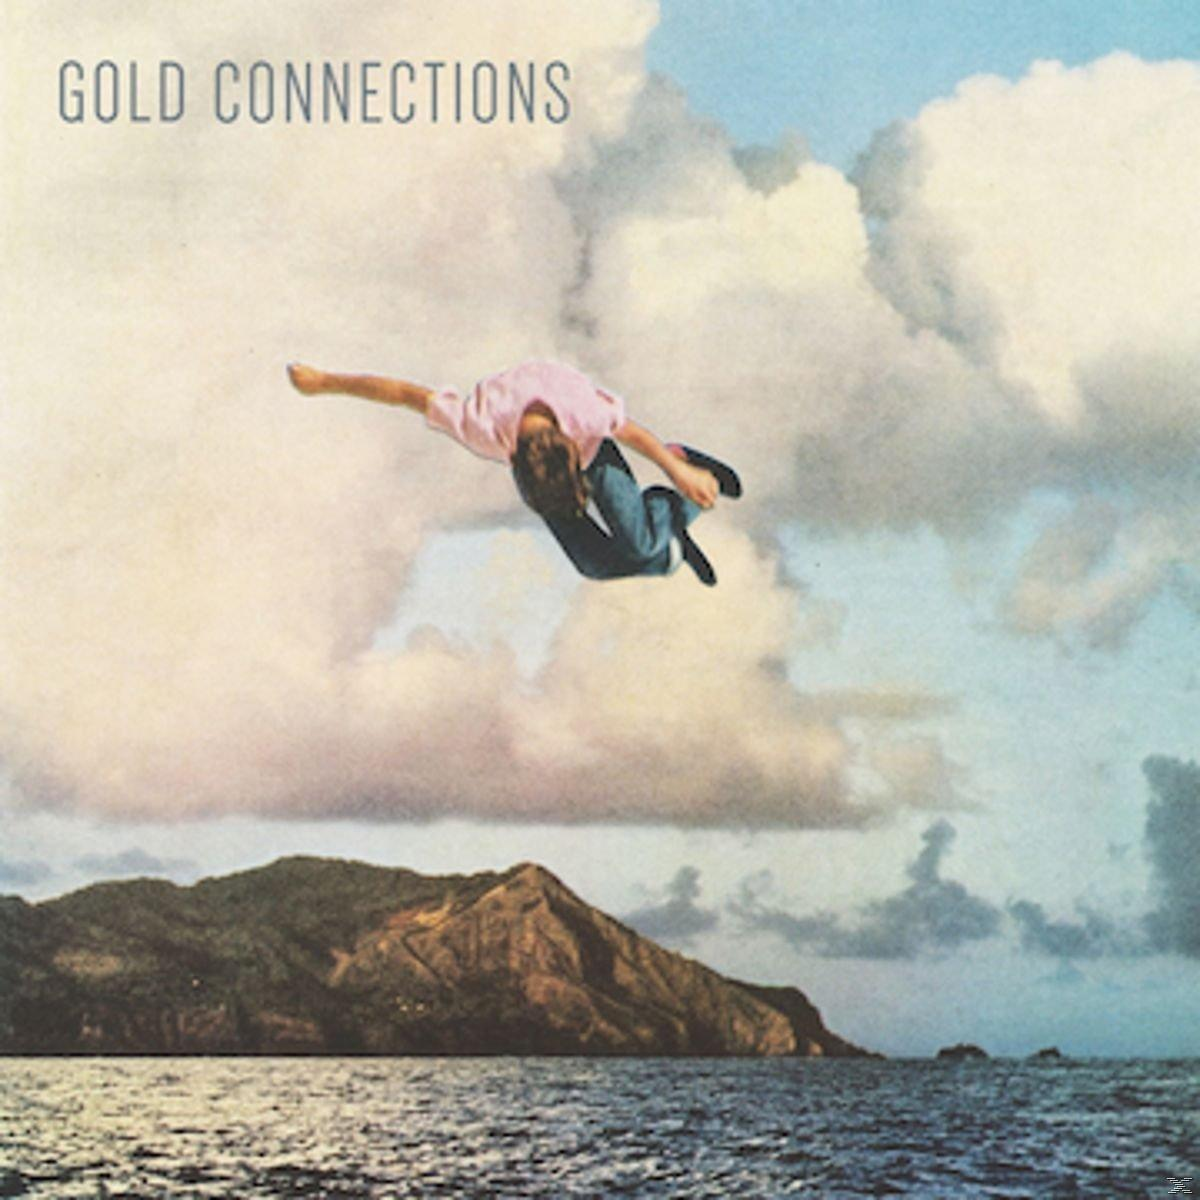 Gold Connections - Gold (analog)) Connections - (EP